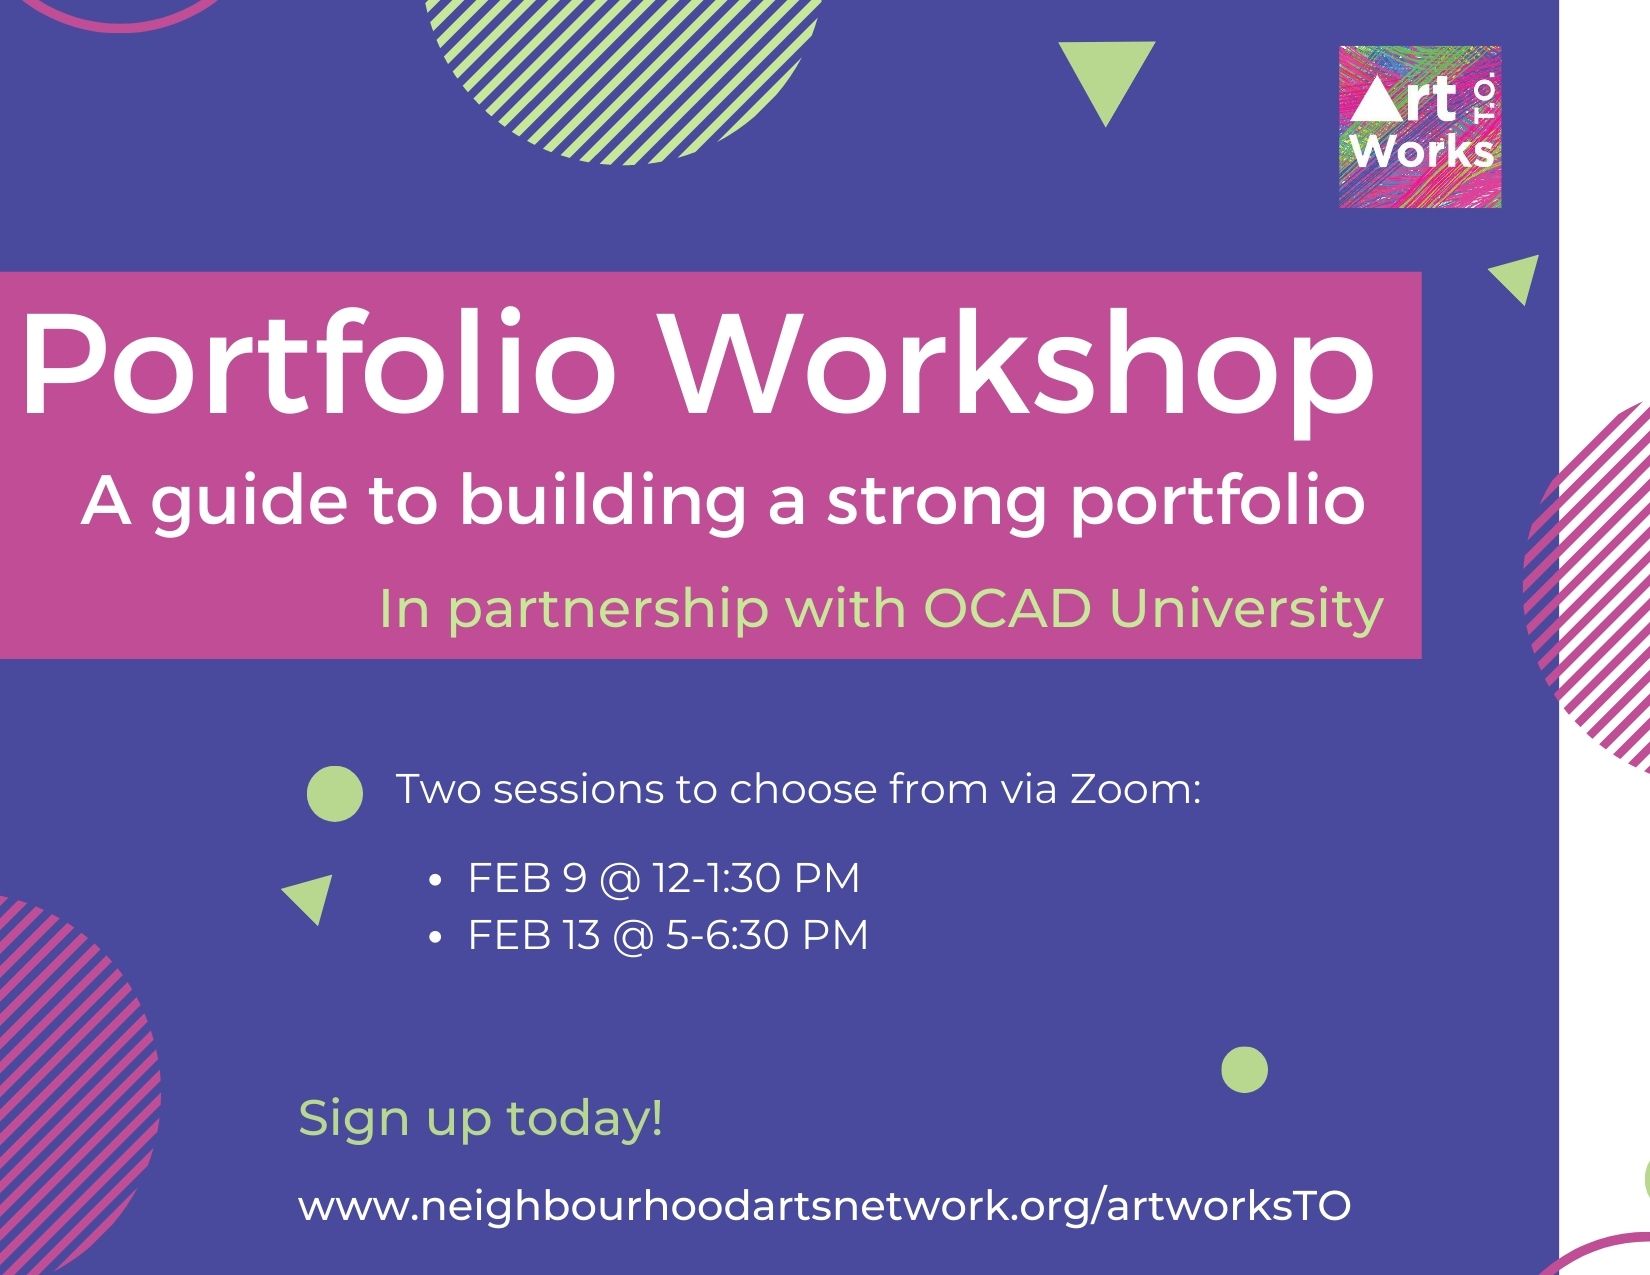 Image: Purple background with pink circles. Text reads: OCAD Portfolio Training  A Guide to Building a Strong Portfolio workshop via Zoom